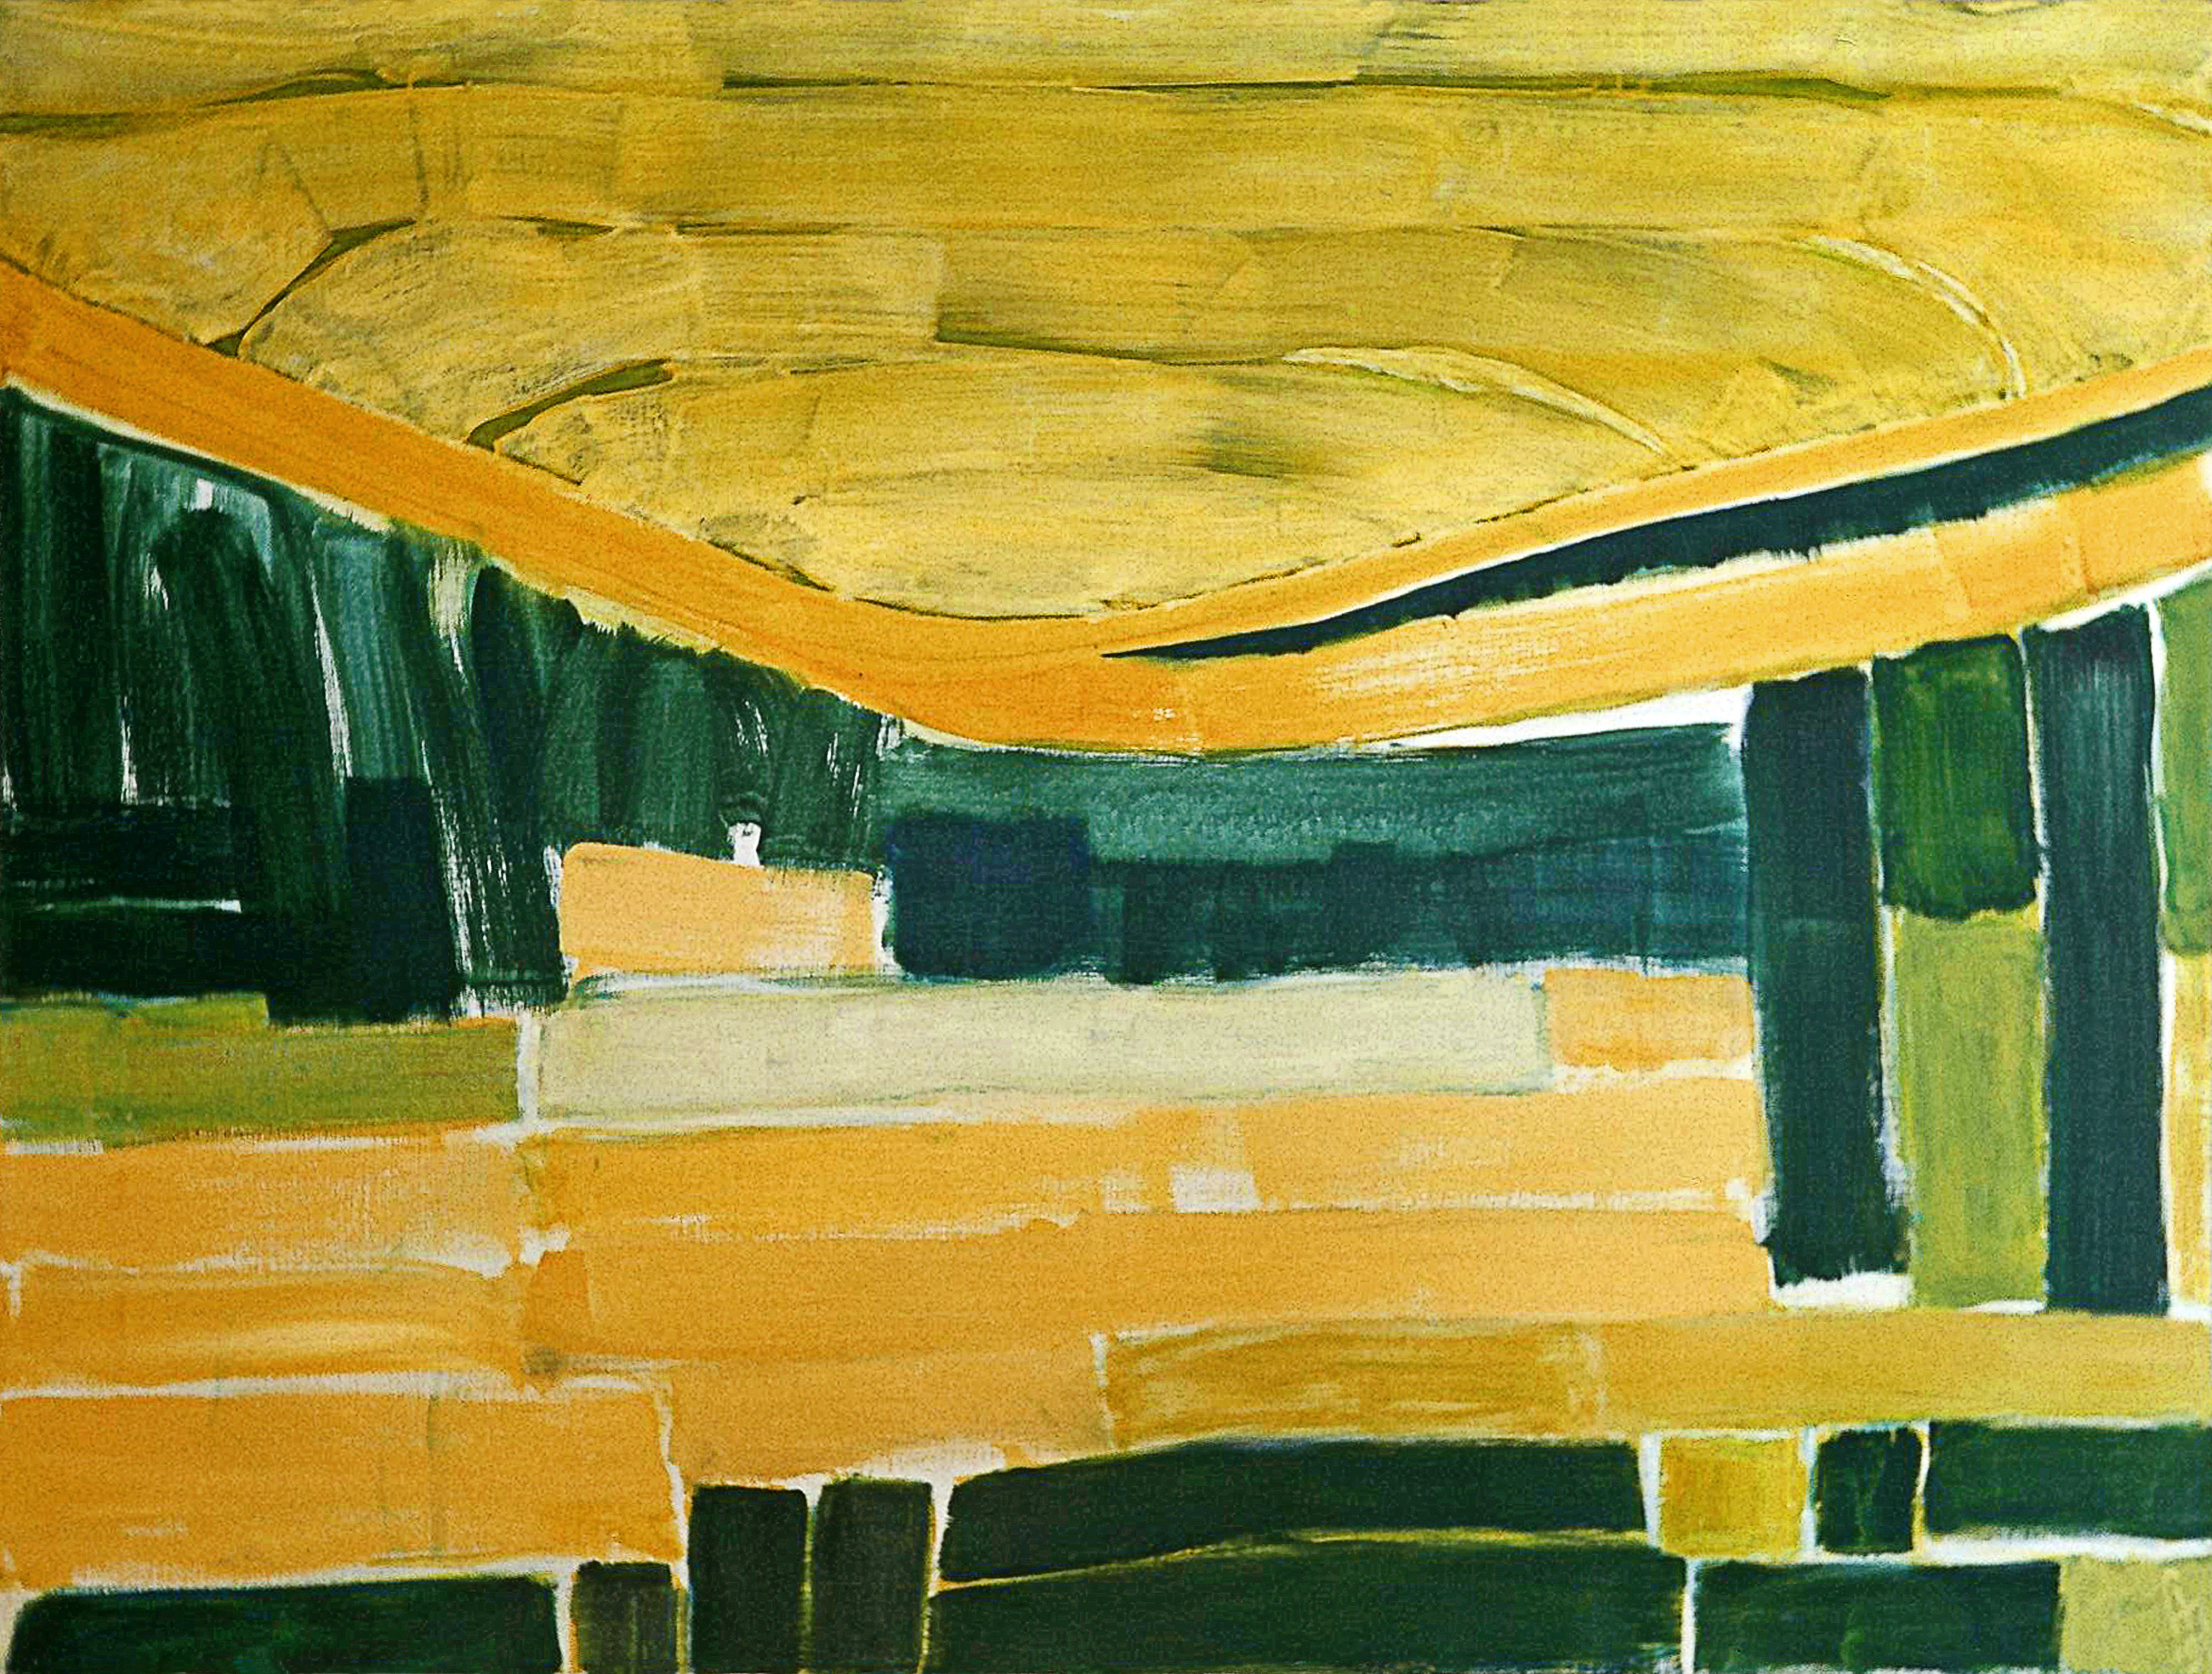 1990 - 'Abstract landscape with Sunlight', large abstract painting; artist Fons Heijnsbroek, The Netherlands - A high resolution art image in free download to print, in public domain / Commons, CC-BY., 20th, Netherlands, Heijnsbroek, High, HQ Photo